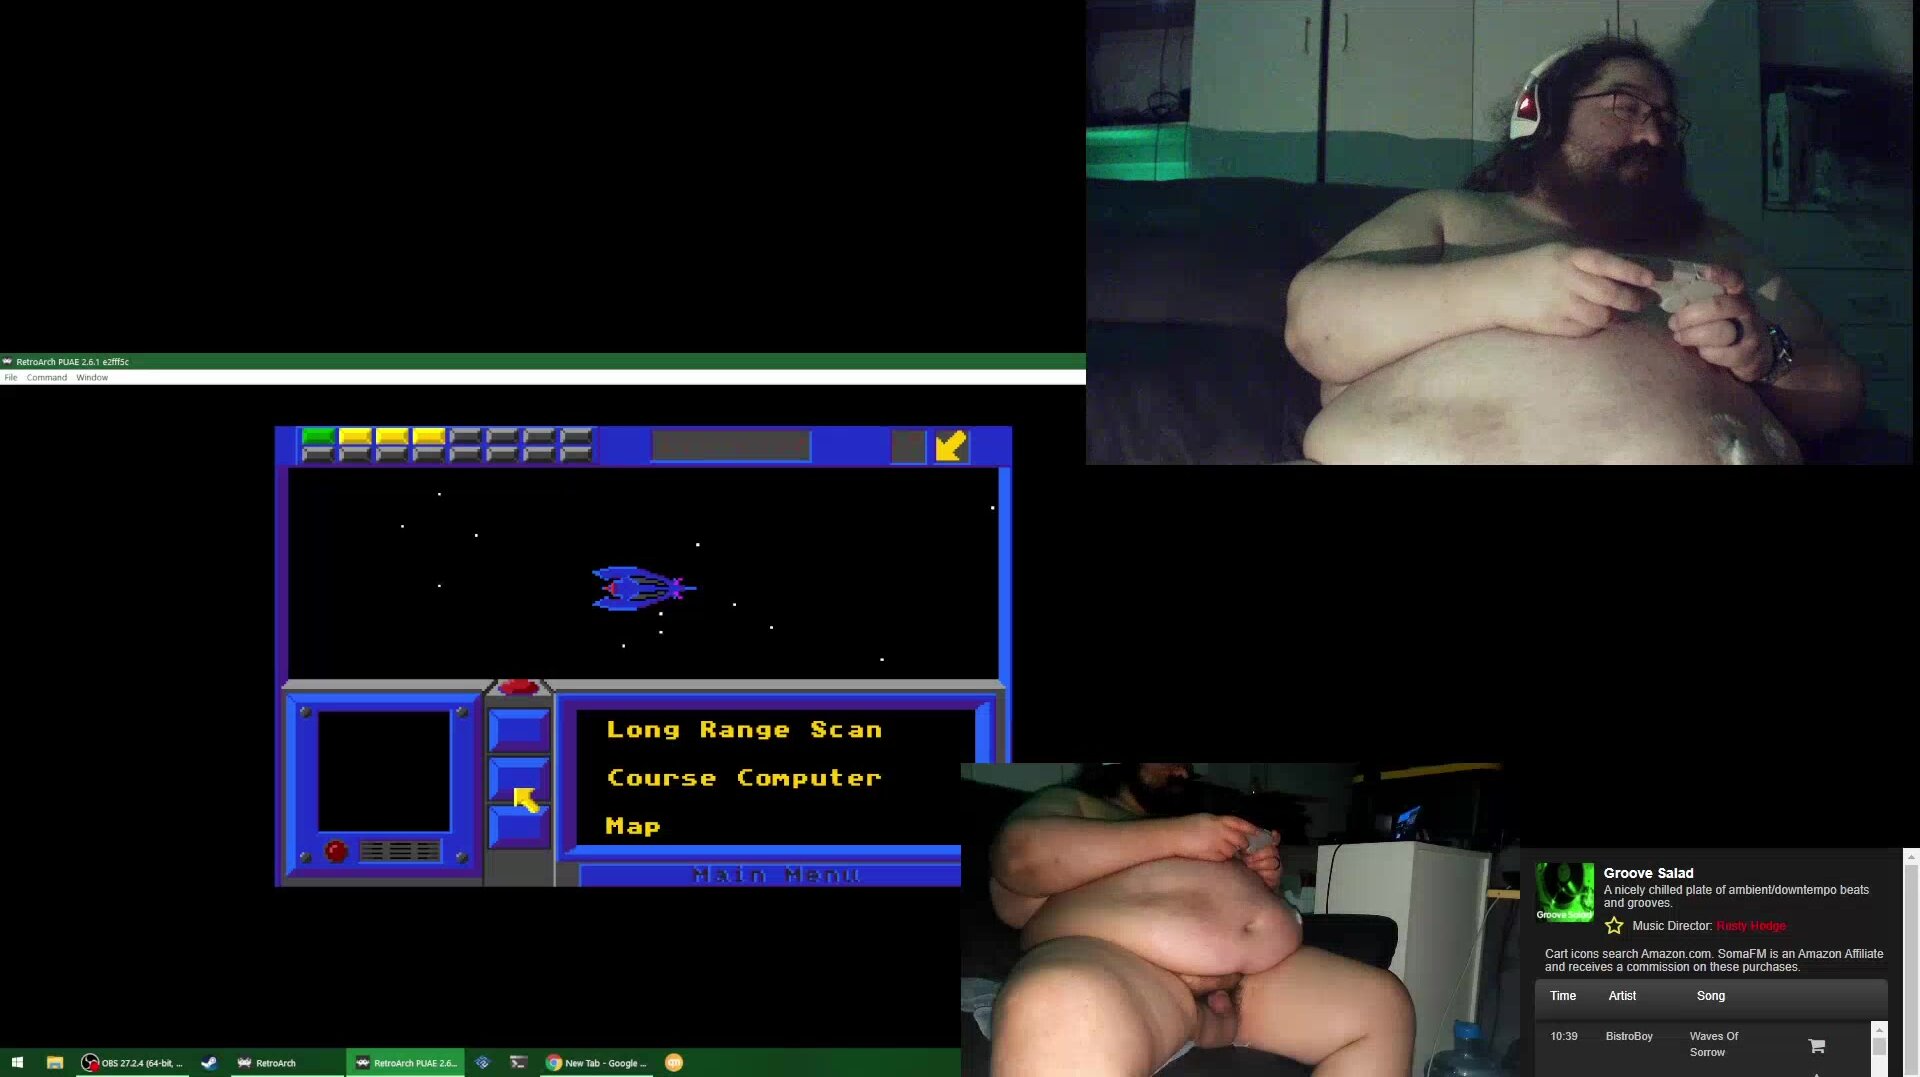 Stoned naked gaming series - Dad's Amiga Collection